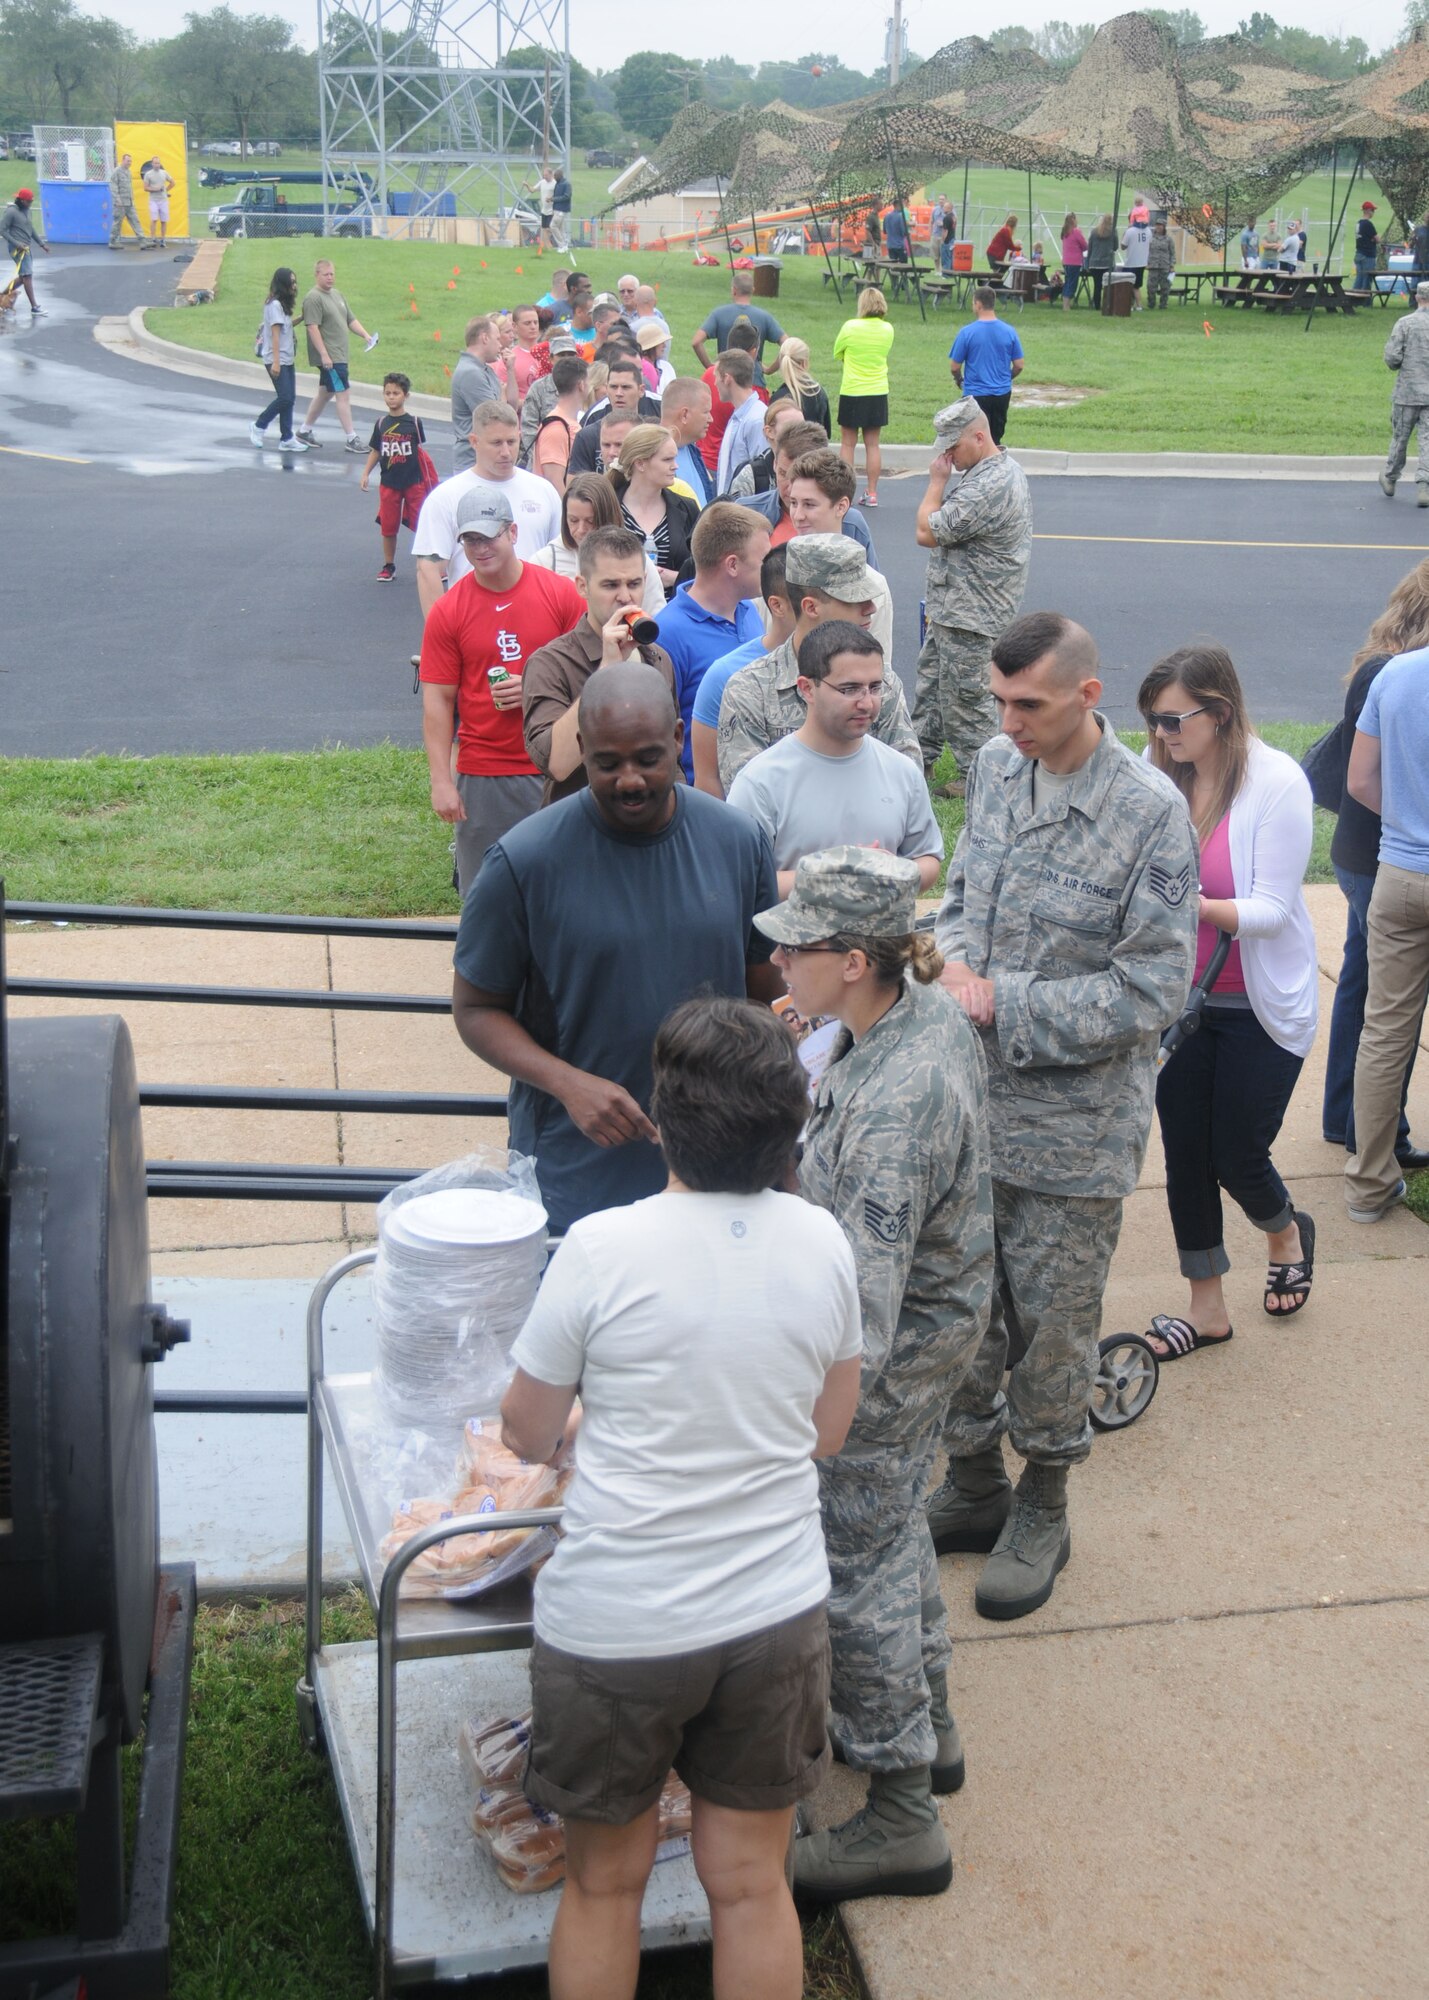 Missouri Air National Guardsmen and their Families line up to take advantage of the burgers and hot dogs grilled by the 131st Bomb Wing Chiefs Council during the Annual Jefferson Barracks Family Day event in St. Louis, Missouri on Sept. 6, 2014. (U.S. Air National Guard photo by Senior Airman Nathan Dampf)